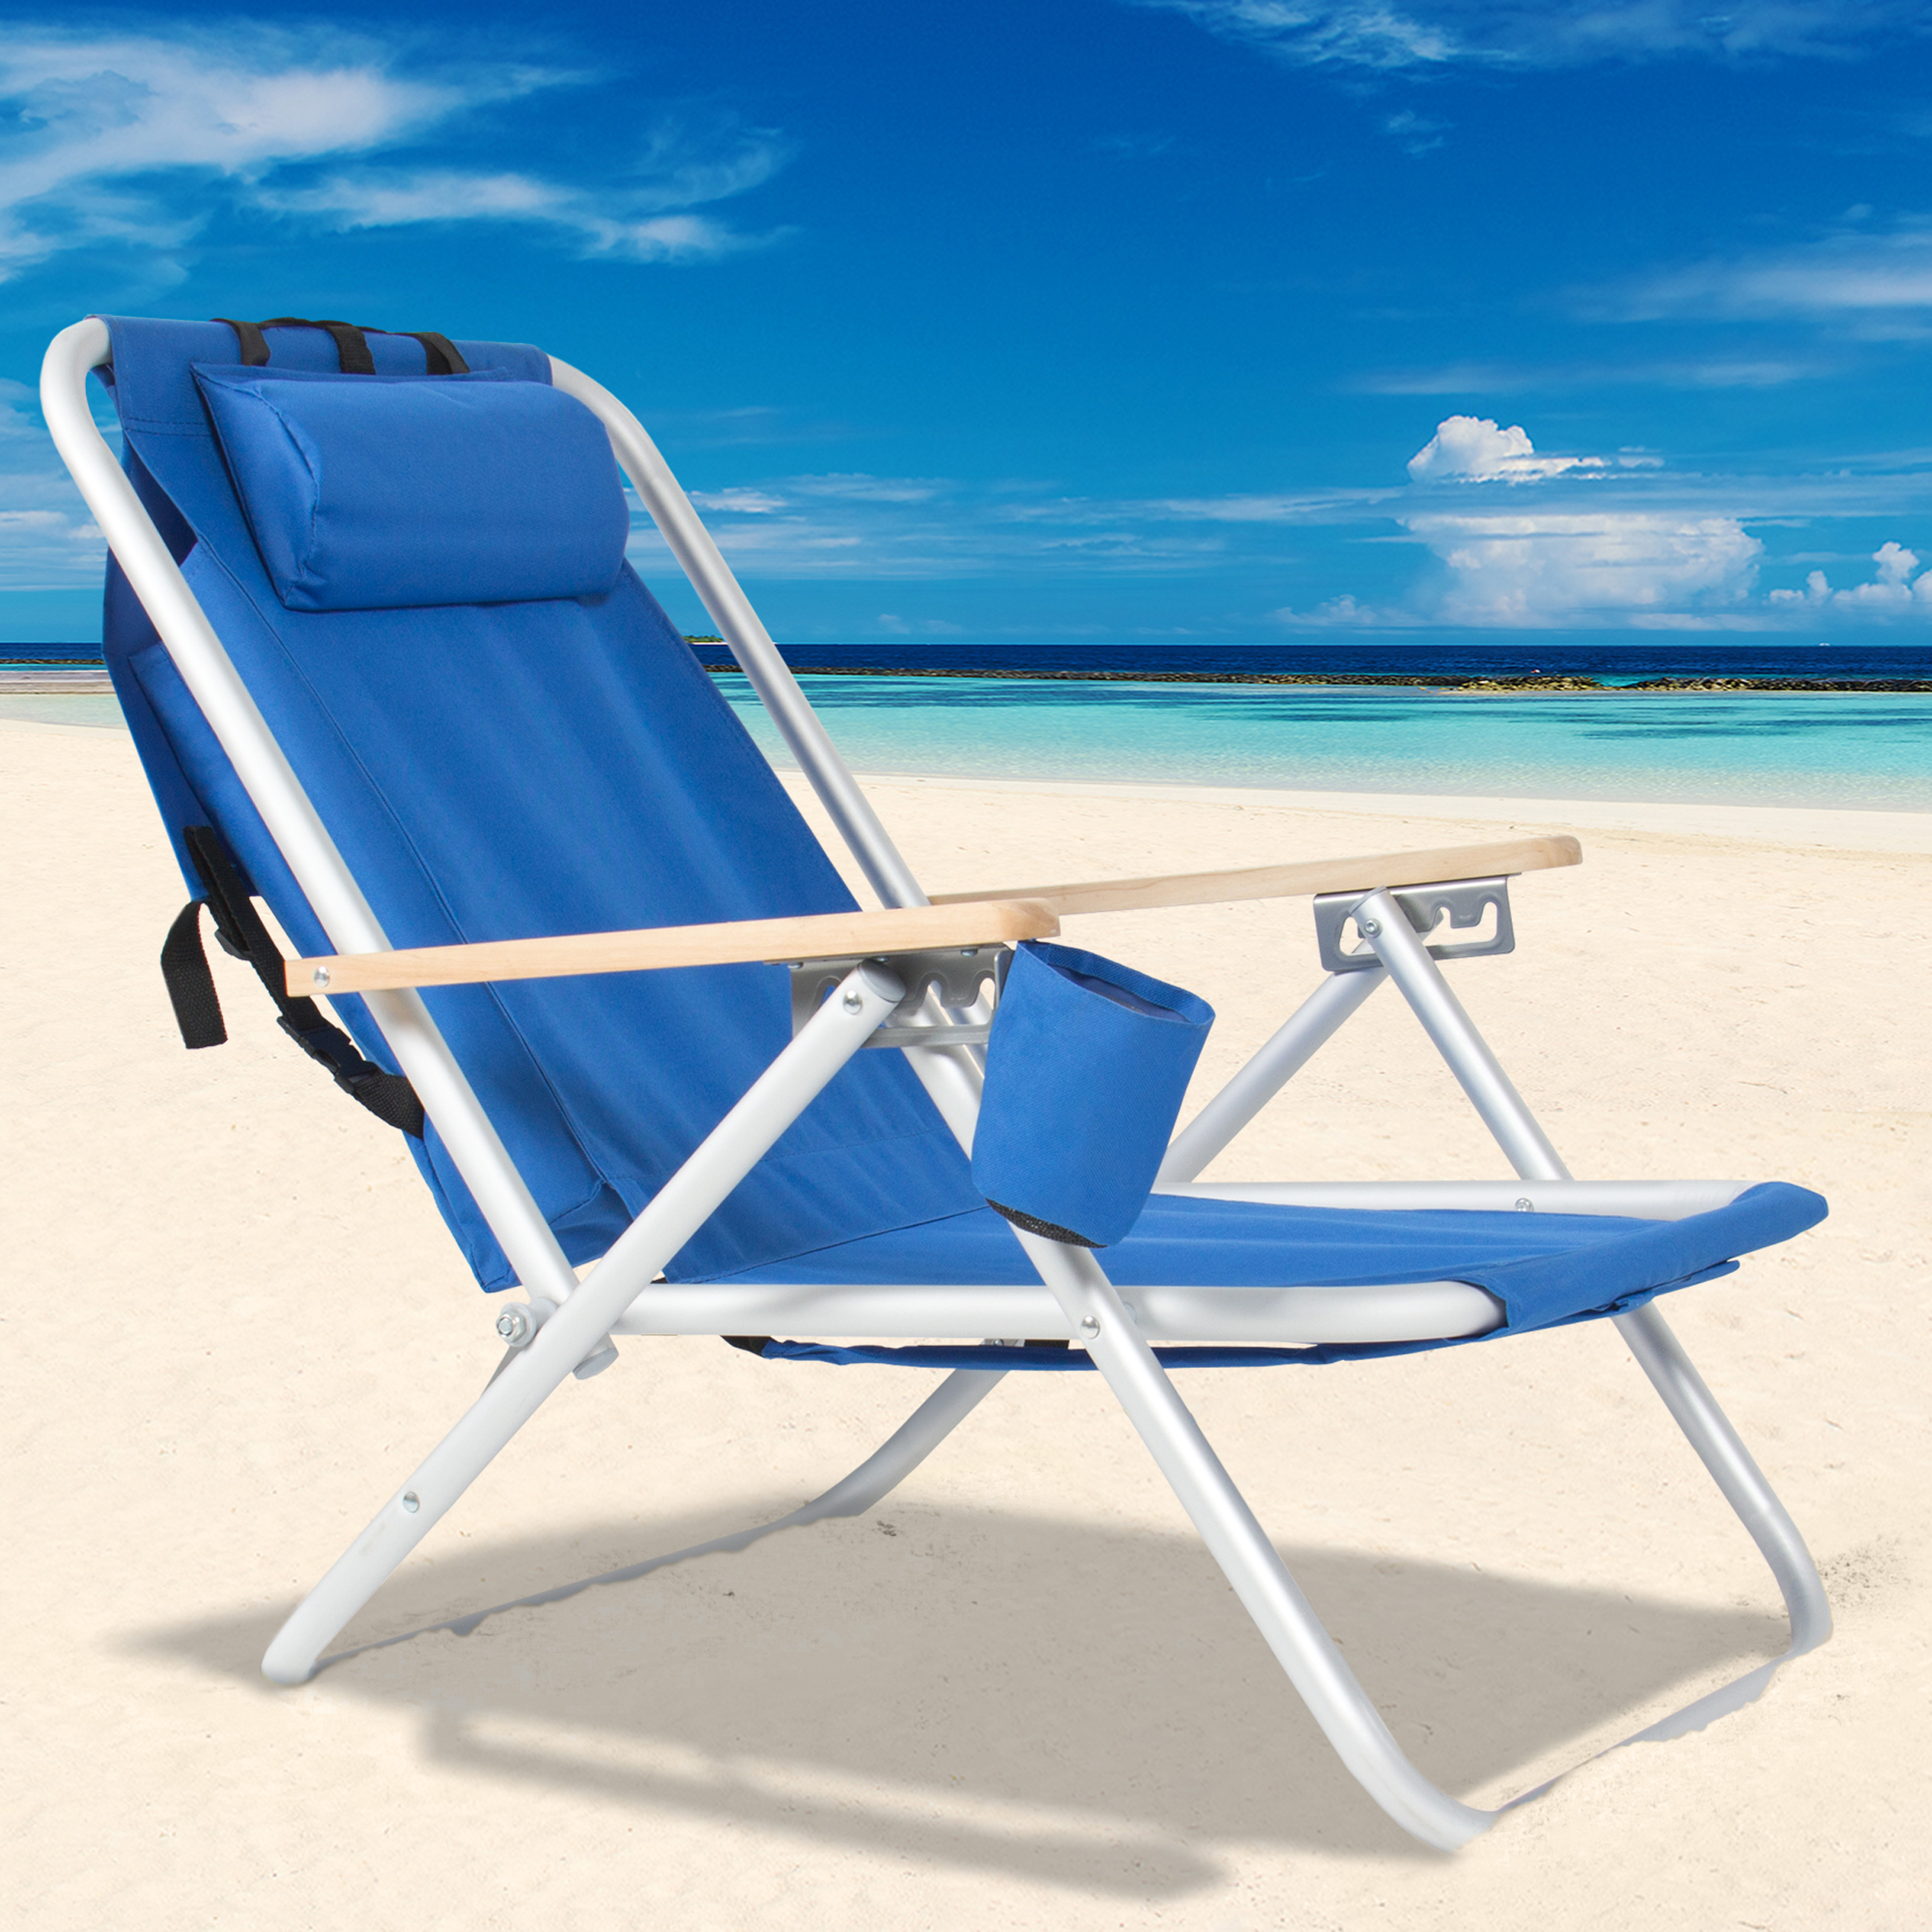 Details about Backpack Beach Chair Folding Portable Chair Blue Solid  Construction Camping New